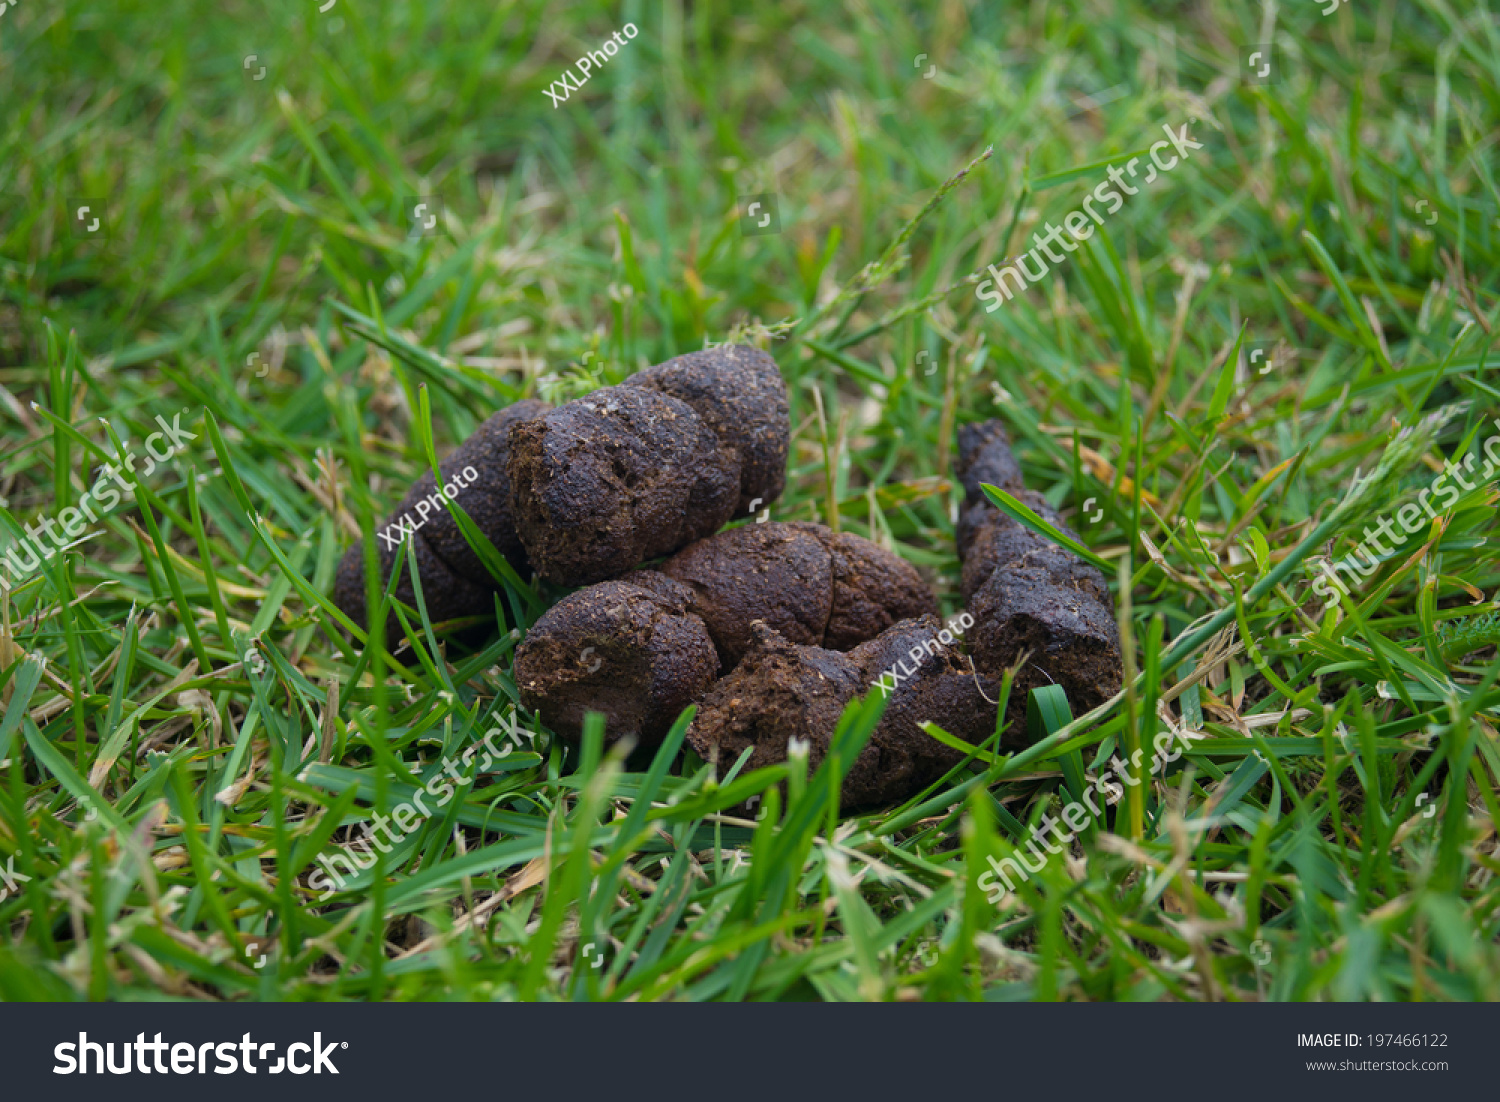 stock-photo-stinking-dog-turd-on-the-green-in-the-sun-197466122.jpg